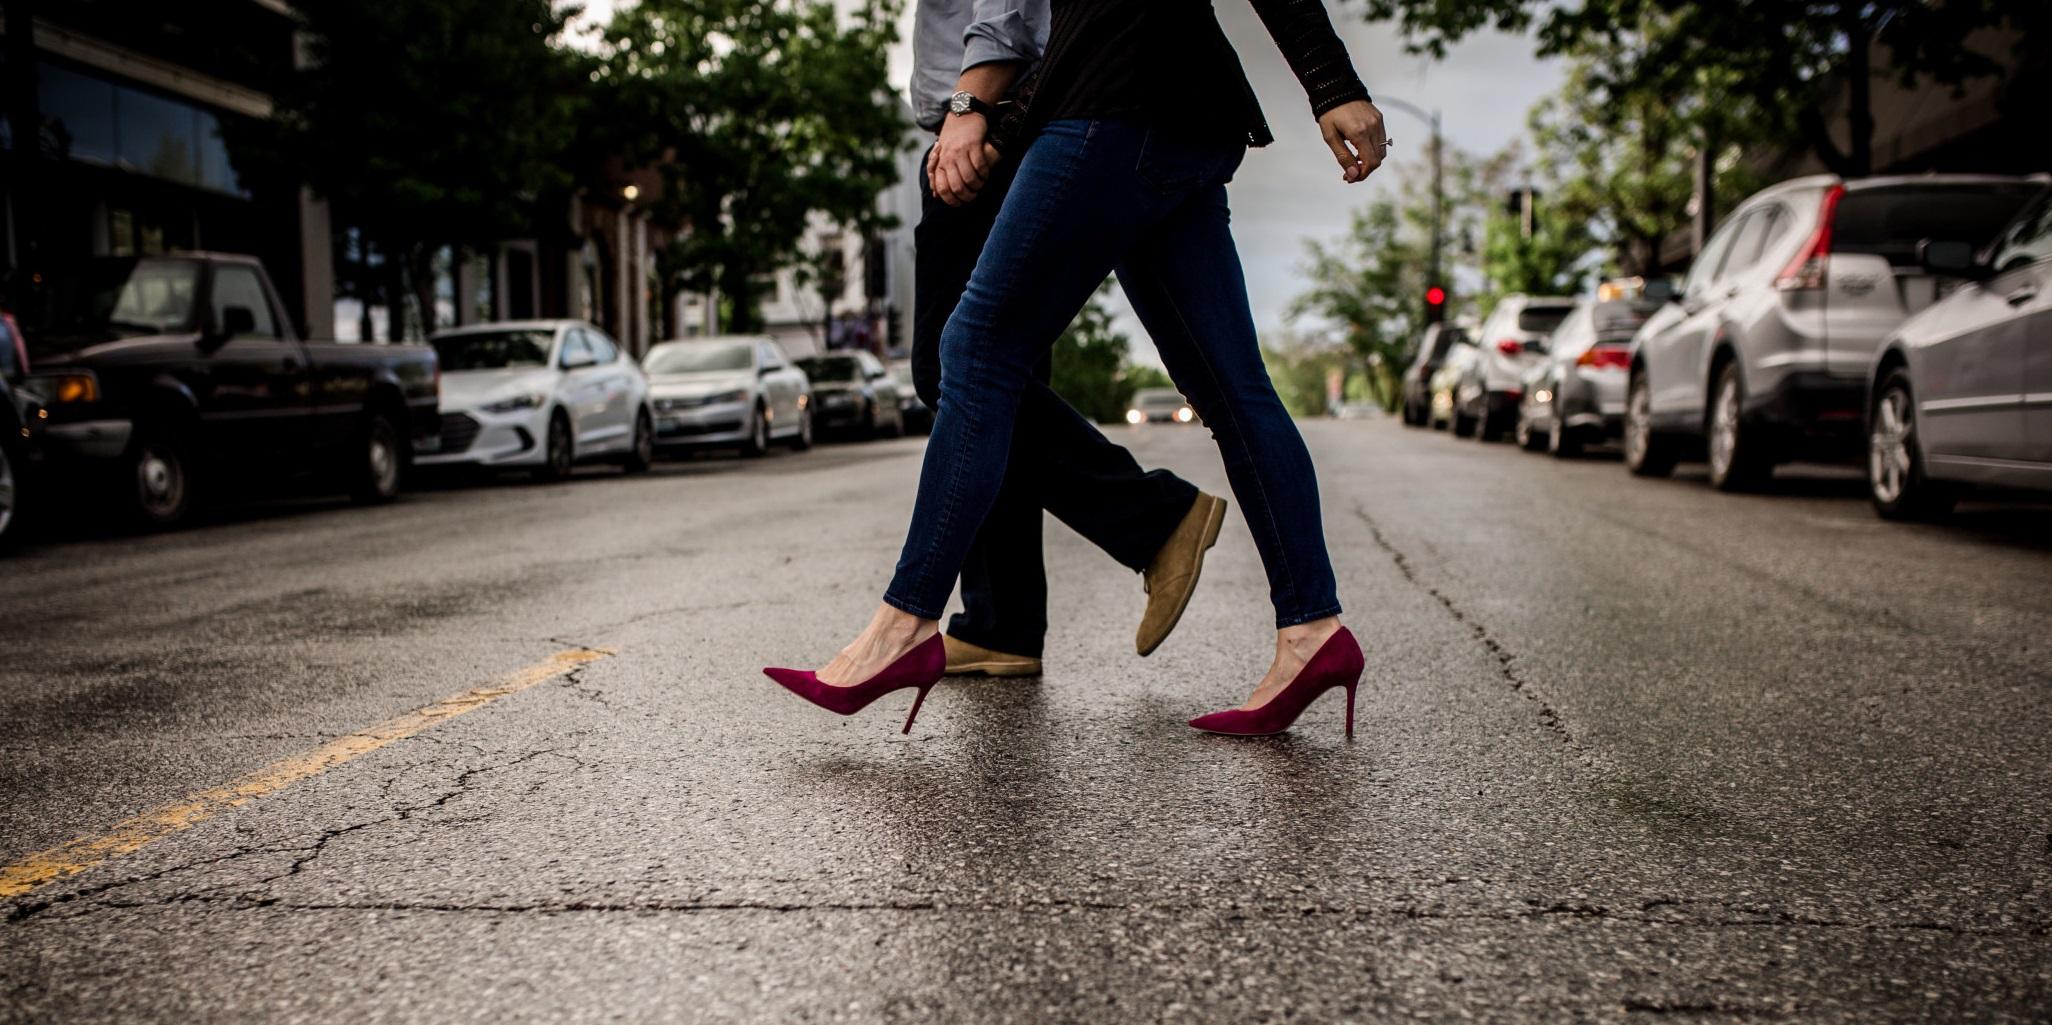 Hiring a pedestrian accident lawyer can help your case